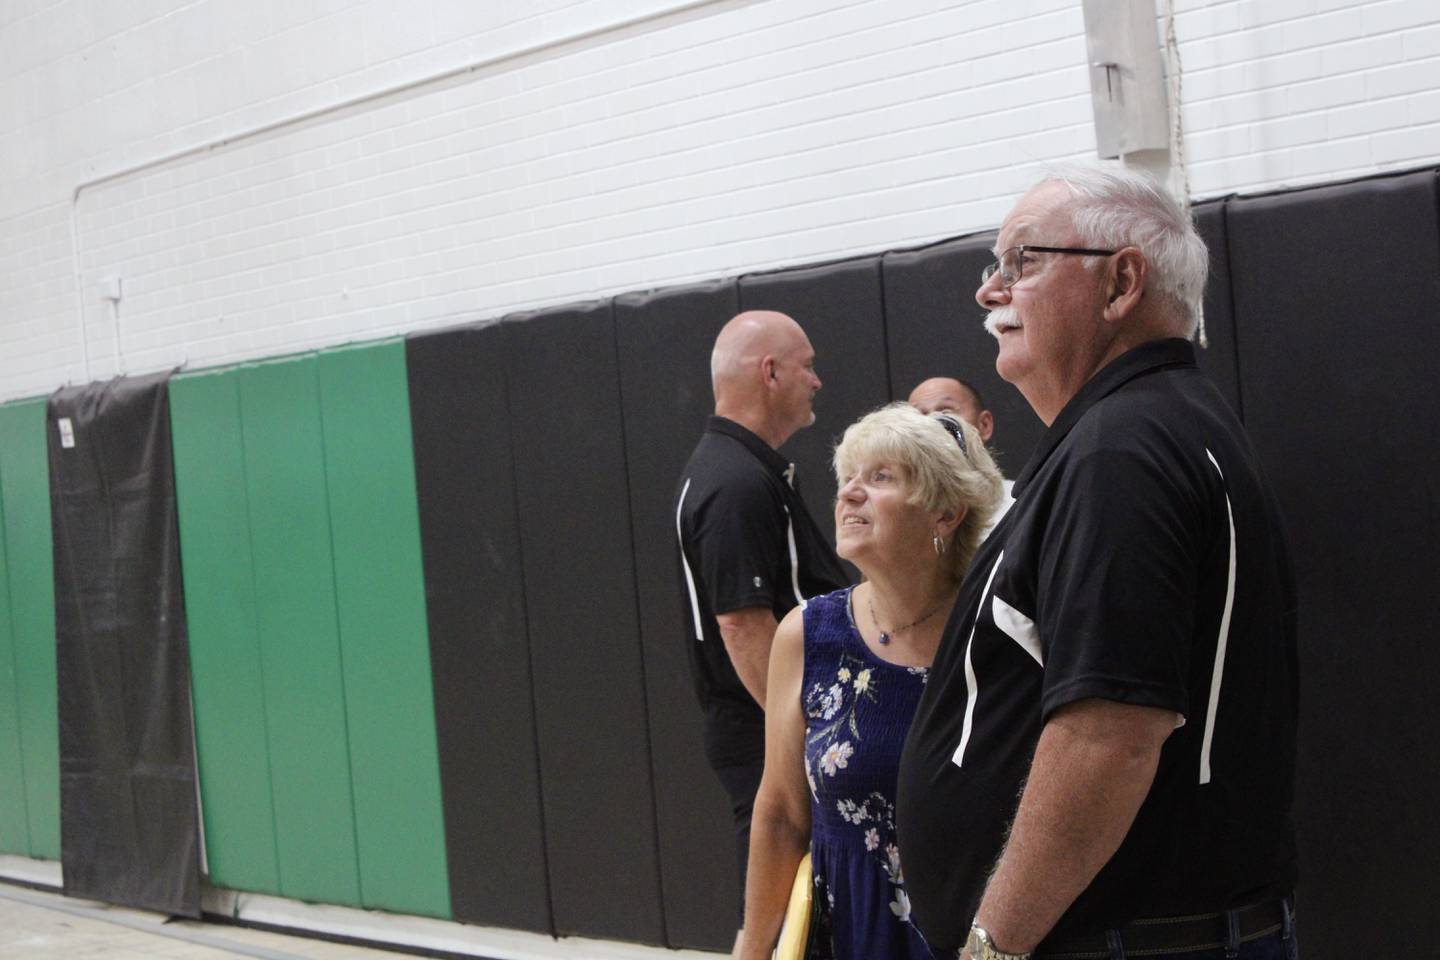 Rock Falls High School board member Jan McKanna talks to board President Merle Gaulrapp about the improvements made to Tabor Gymnsium during a tour of ongoing renovation on Wednesday.